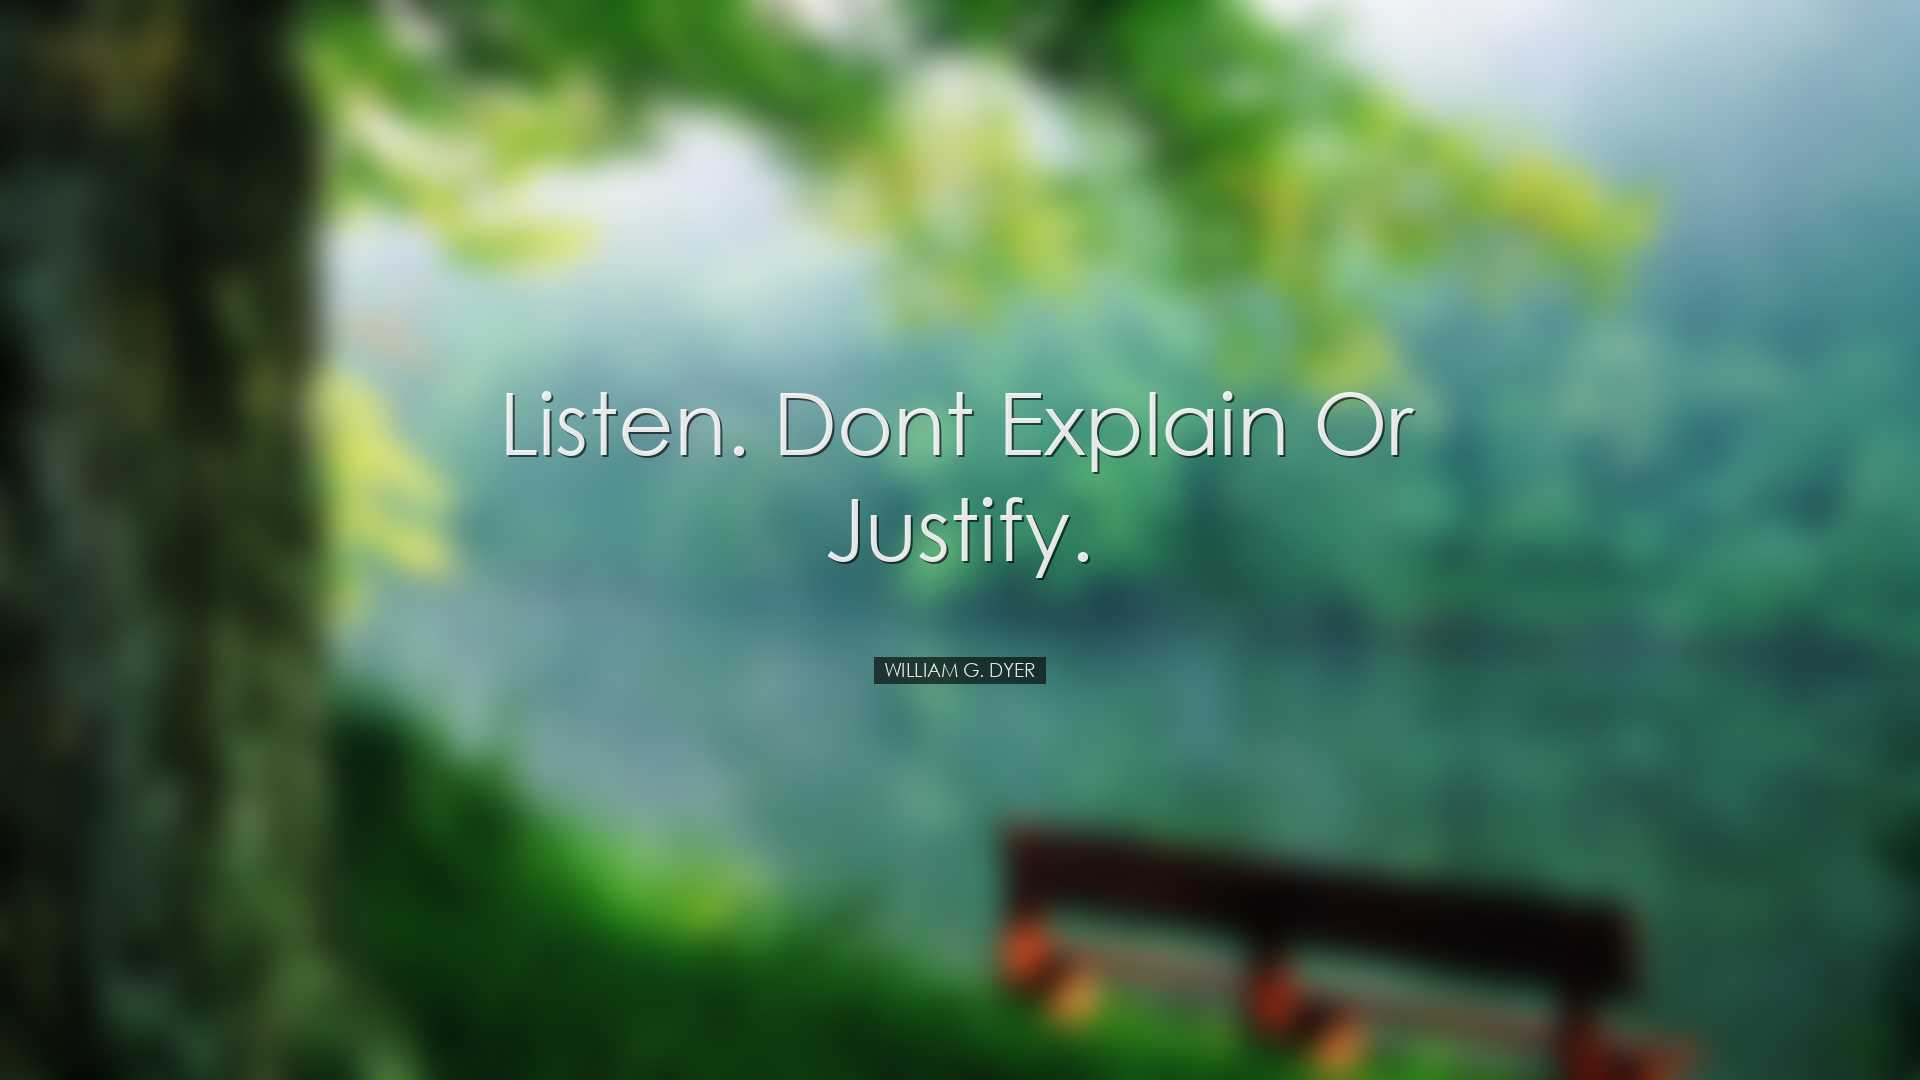 Listen. Dont explain or justify. - William G. Dyer